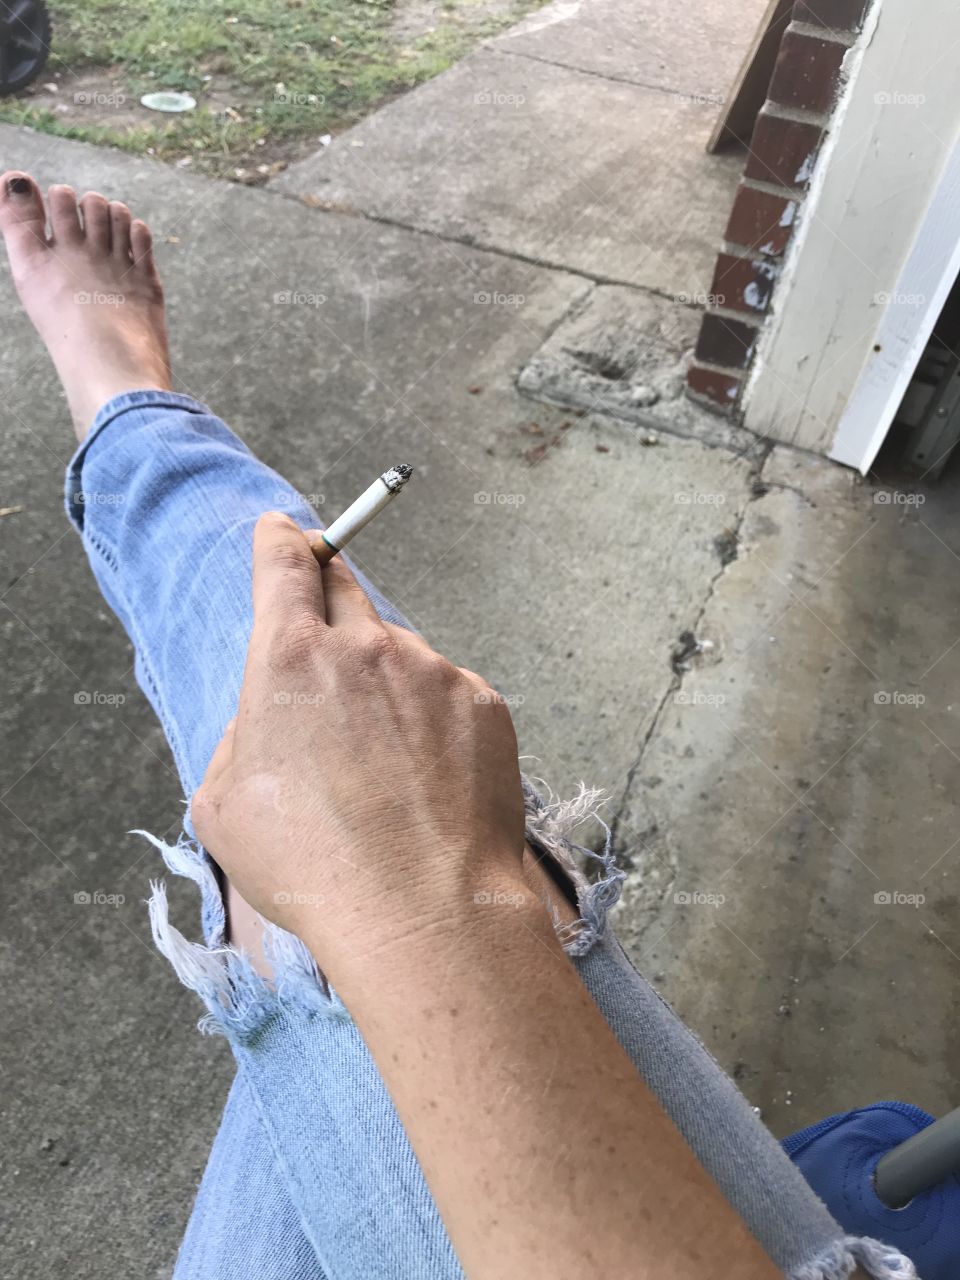 Stubby toes ripped jeans. Smoking kills! Toxic and addiction! Trying to quit a bad habit 